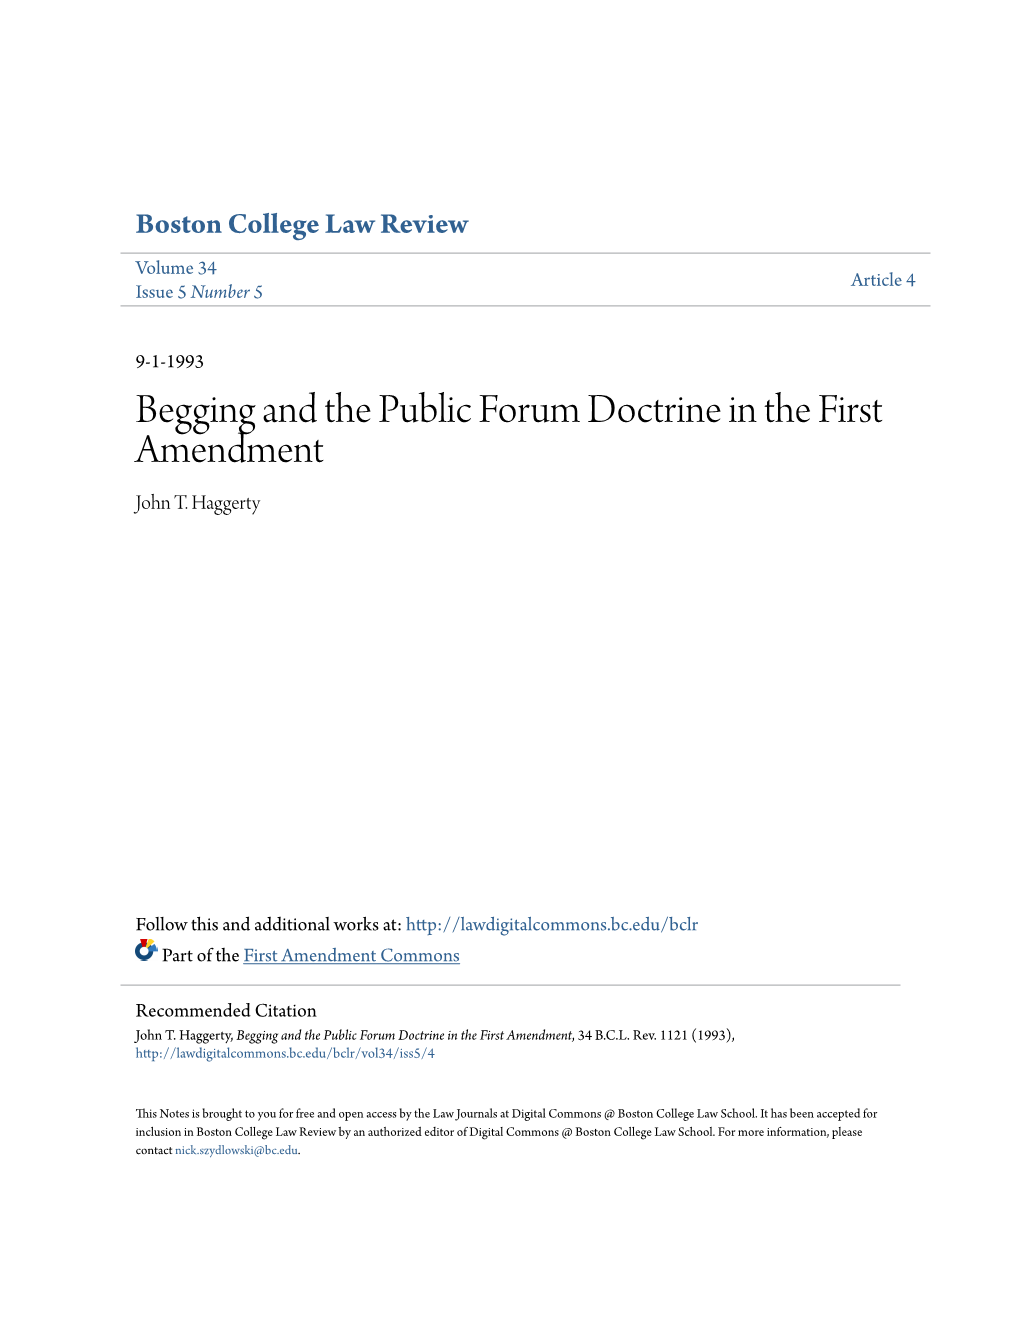 Begging and the Public Forum Doctrine in the First Amendment John T